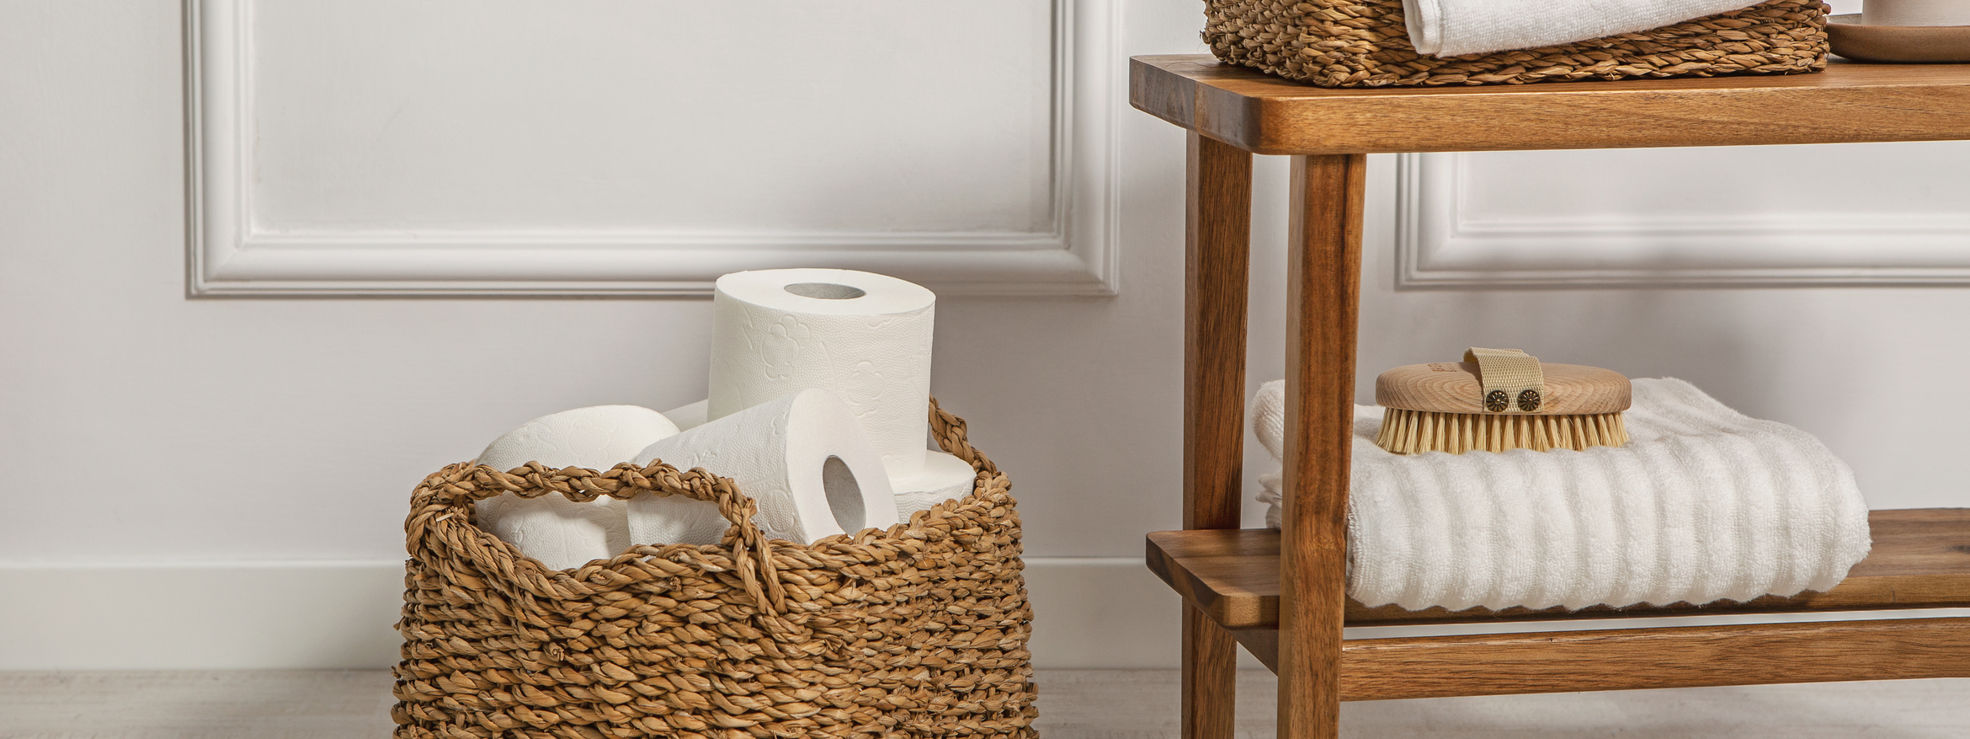 white toilet paper rolls in a basket